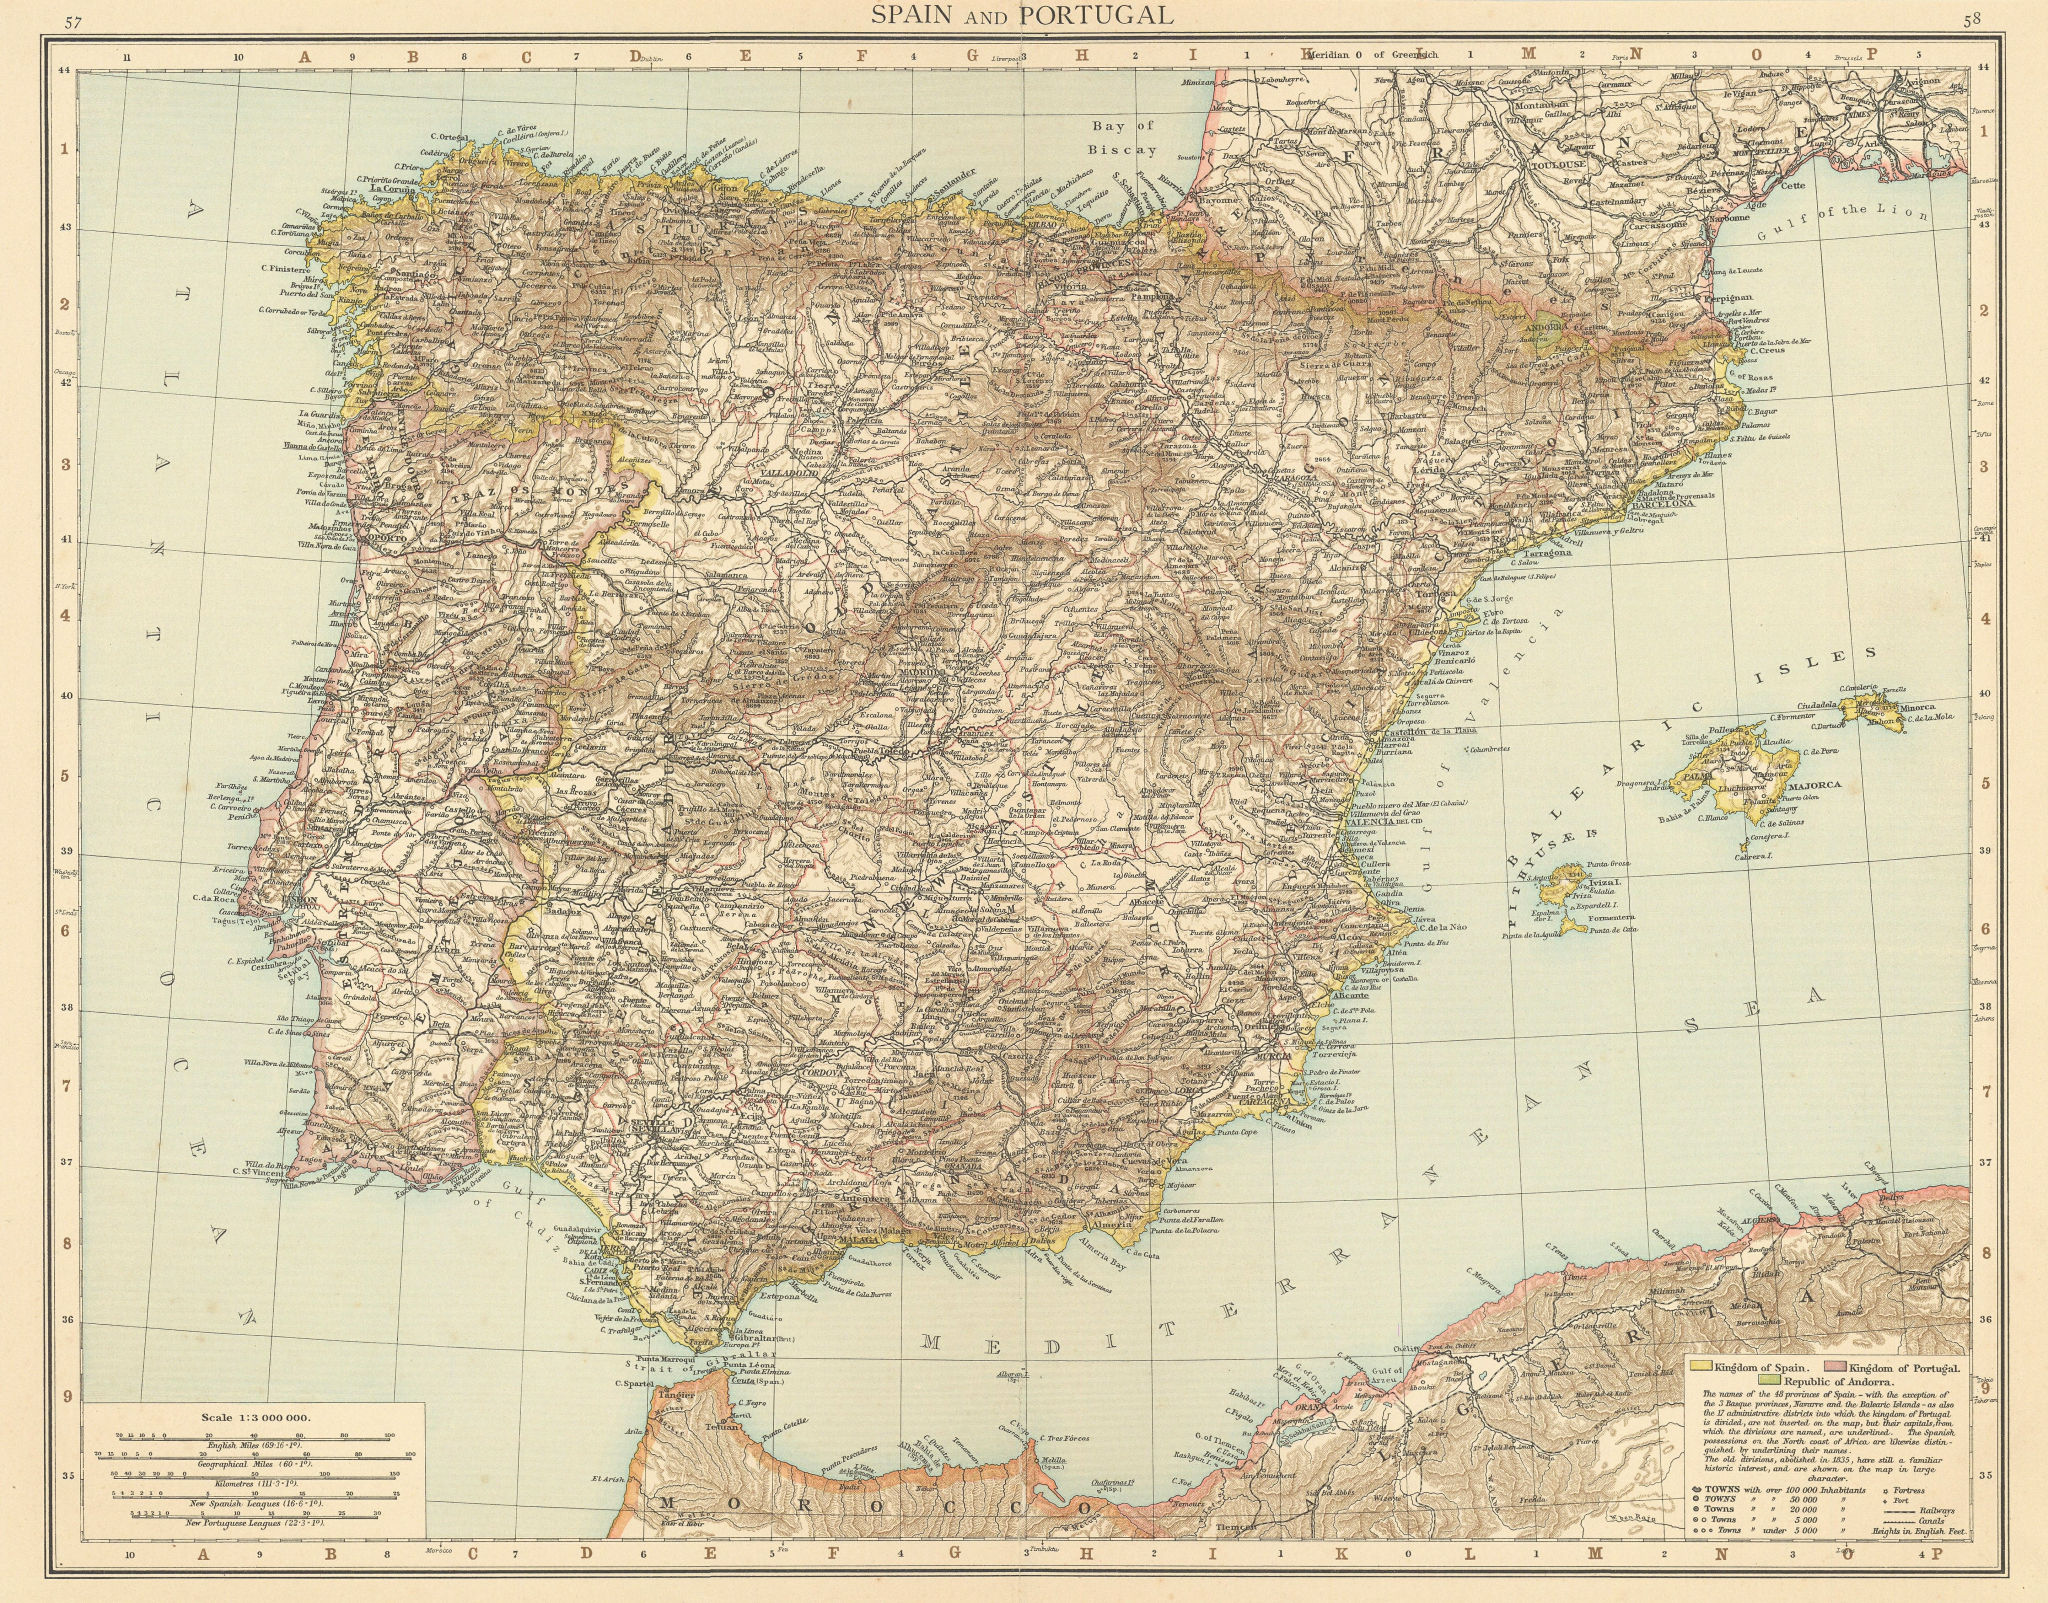 Spain & Portugal. Iberia. TIMES 1895 old antique vintage map plan chart